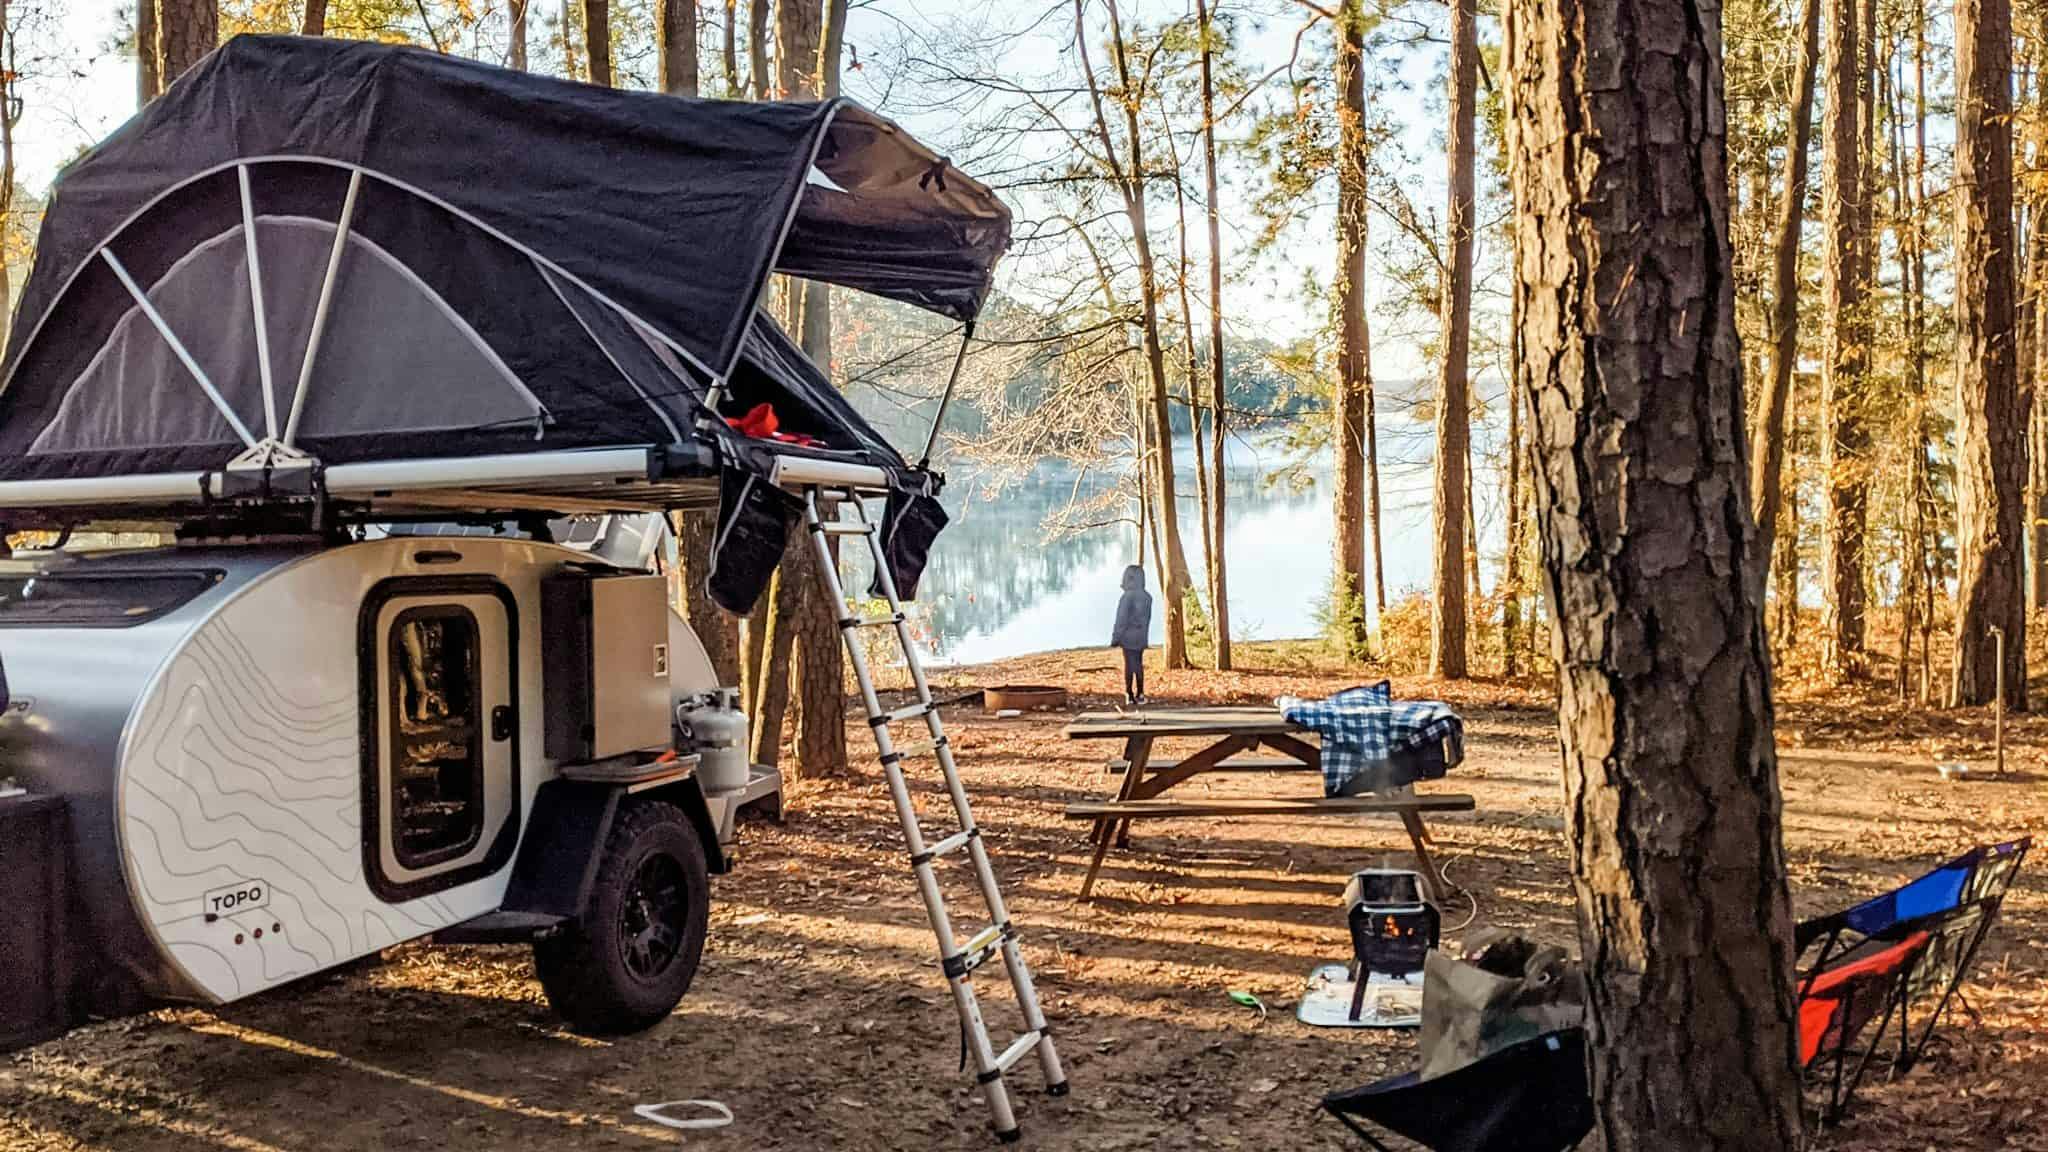 A teardrop camper with a rooftop tent deployed parked in near a lake and picnic table.